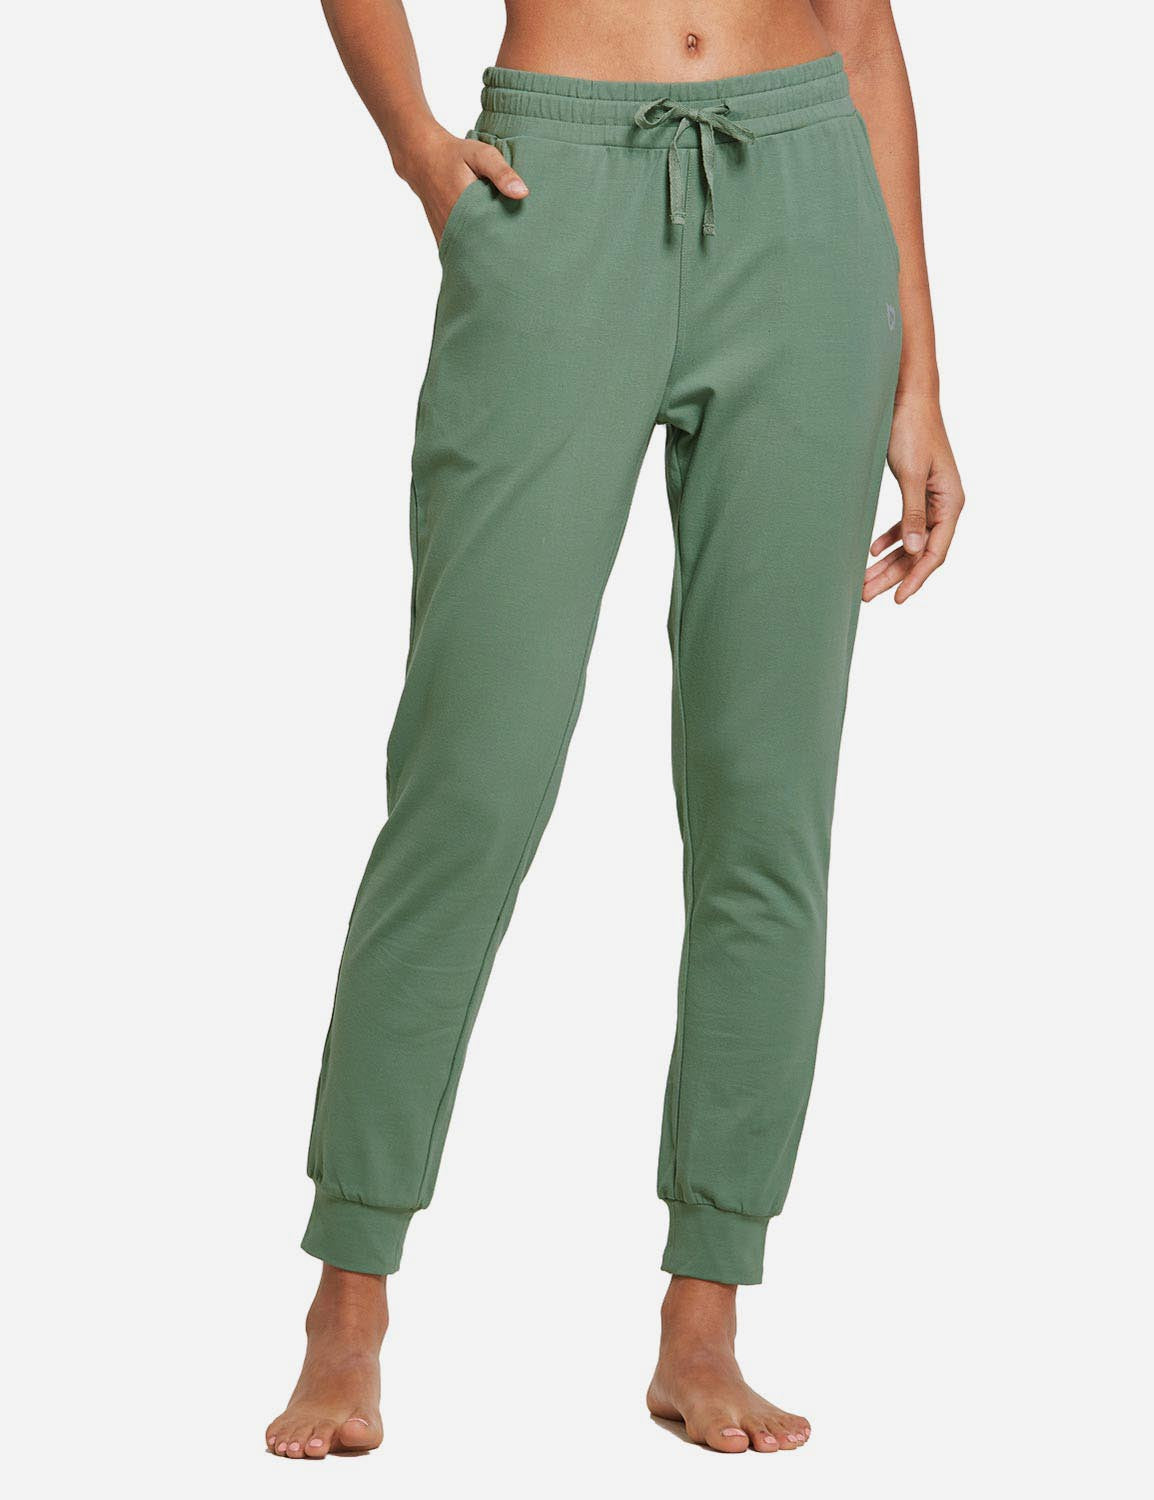 Baleaf Women's Cotton Comfy Pocketed & Tapered Weekend Joggers abh103 Loden Frost Front